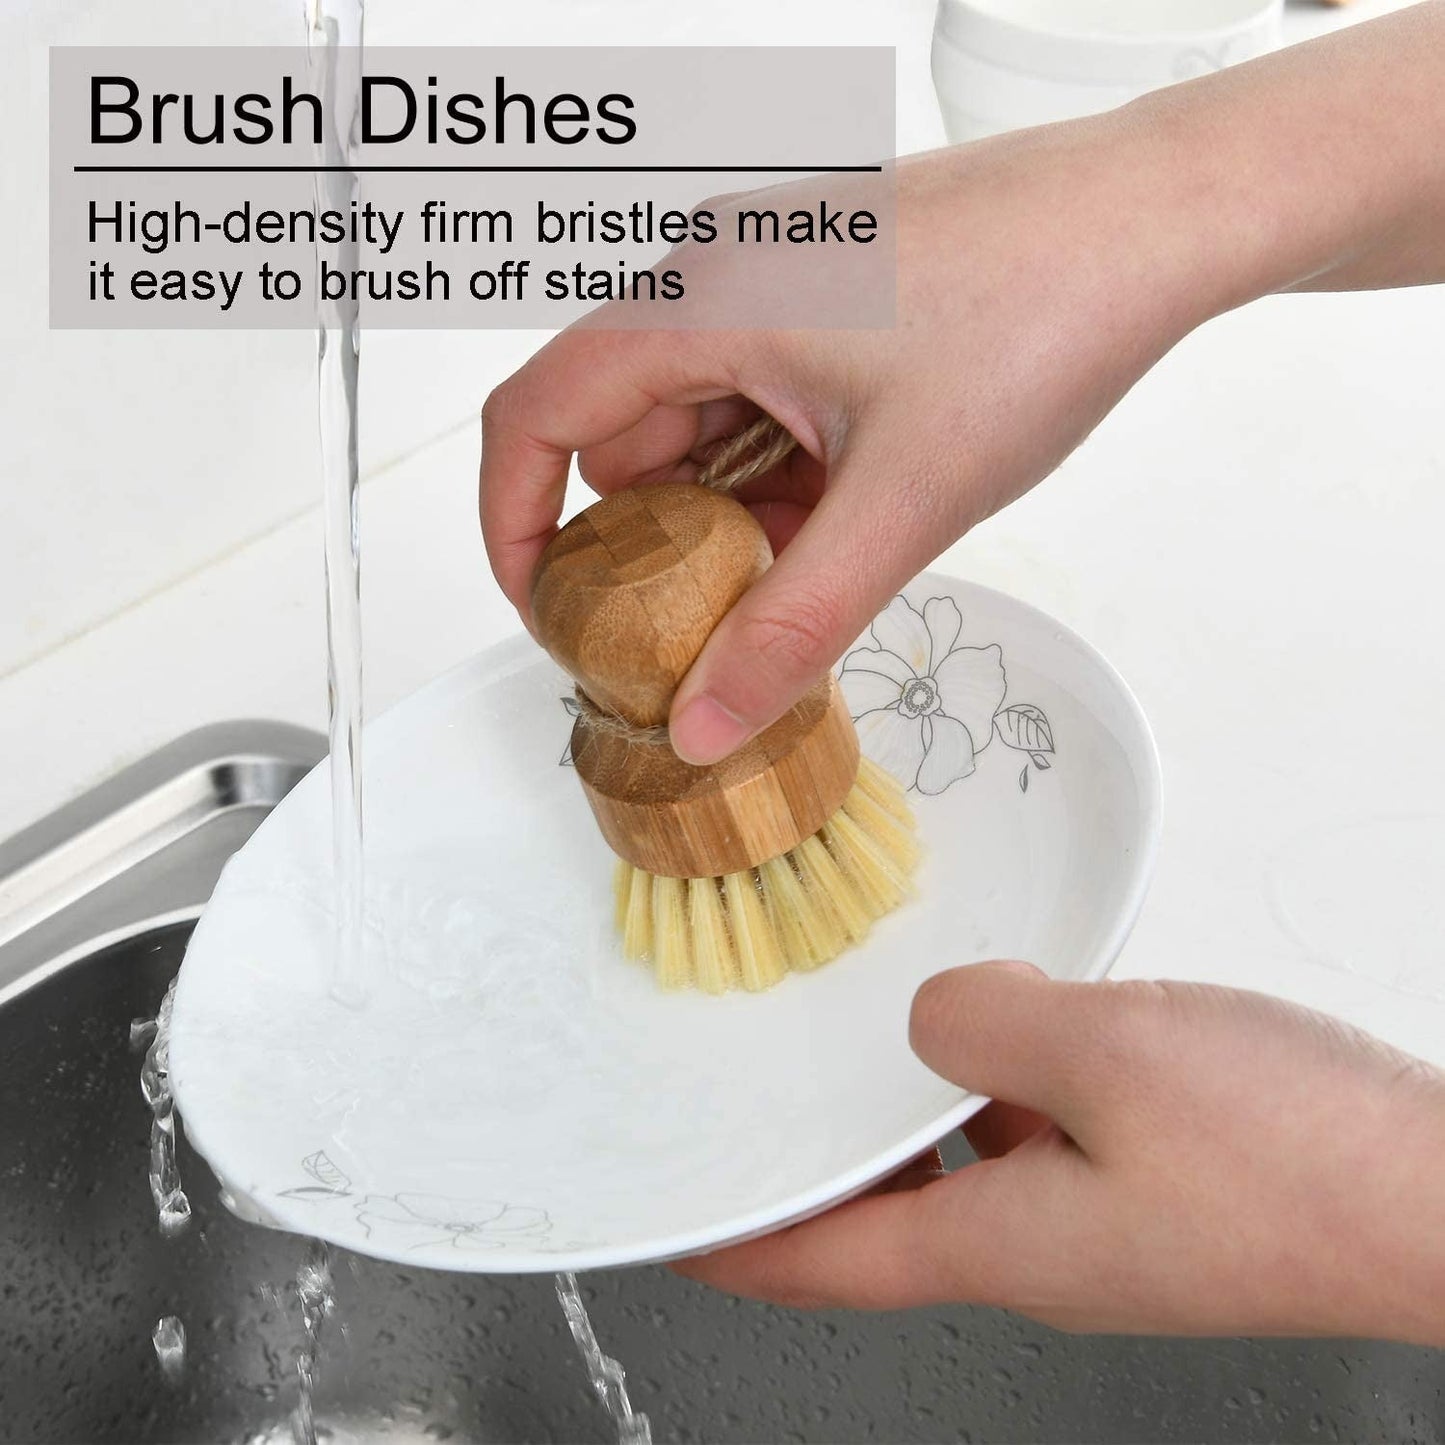 Image for a small bamboo bowl brush being used to scrub a dinner plate.